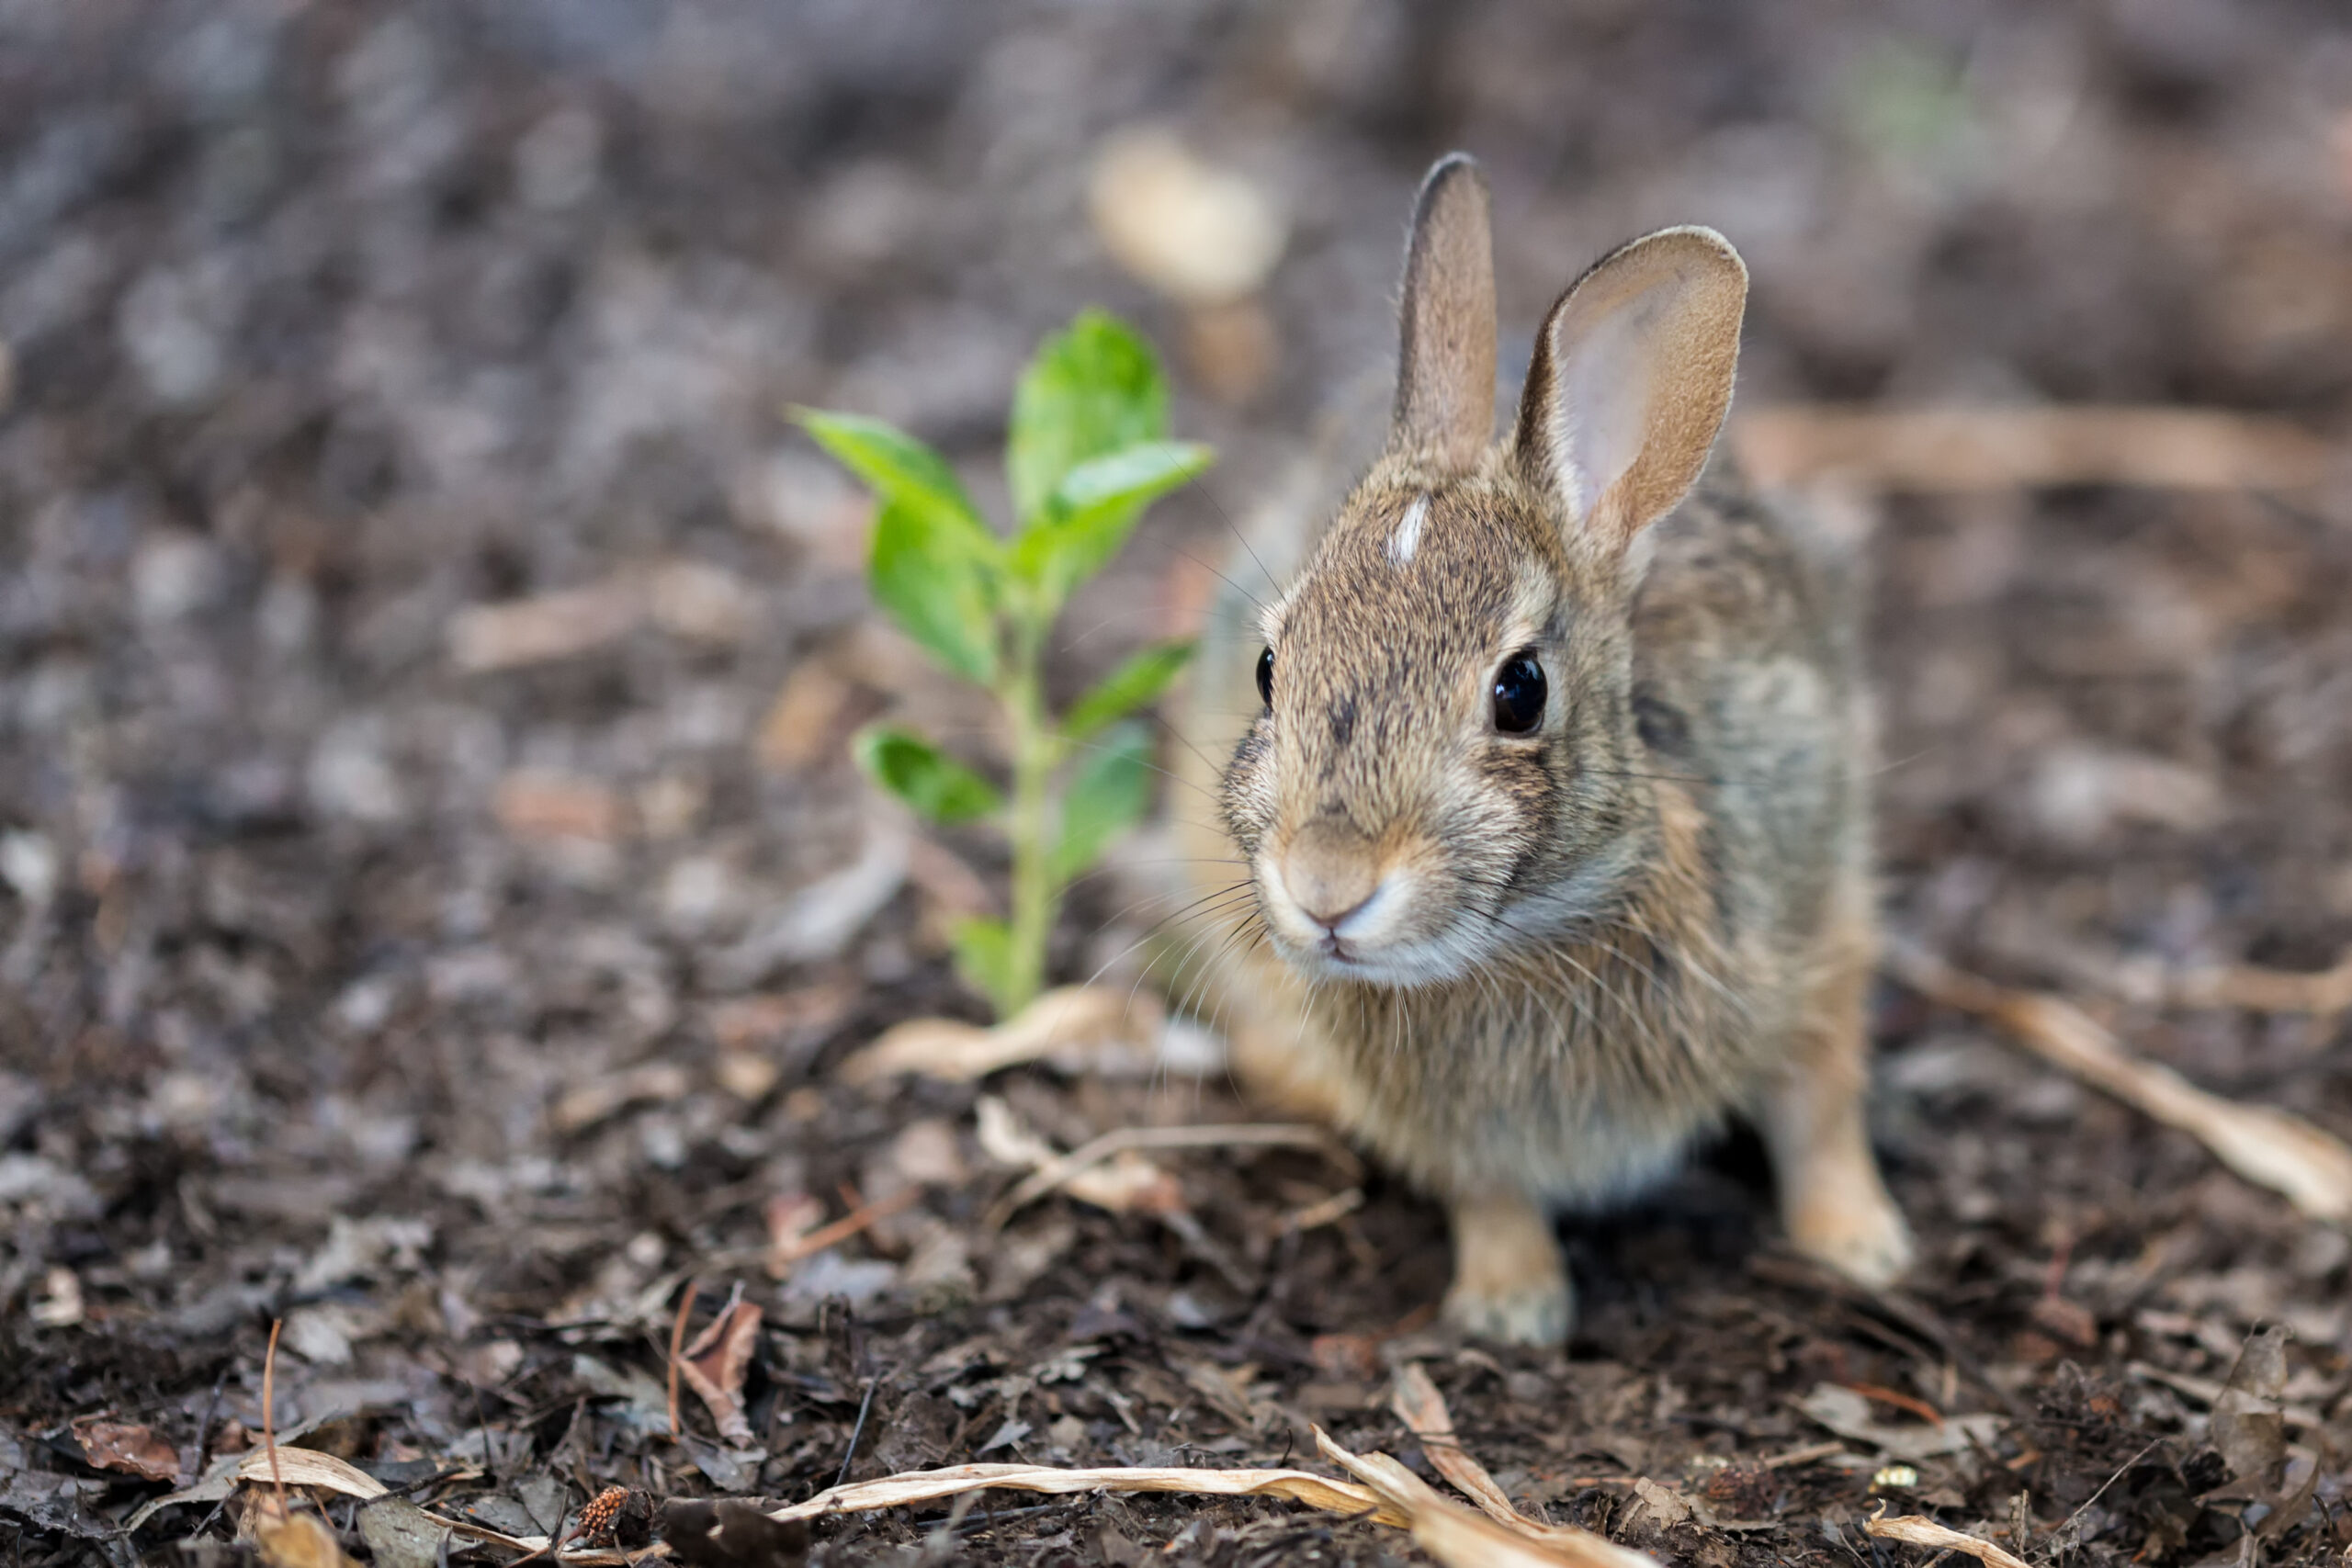 How to Keep Rabbits Out of Your Vegetable Garden